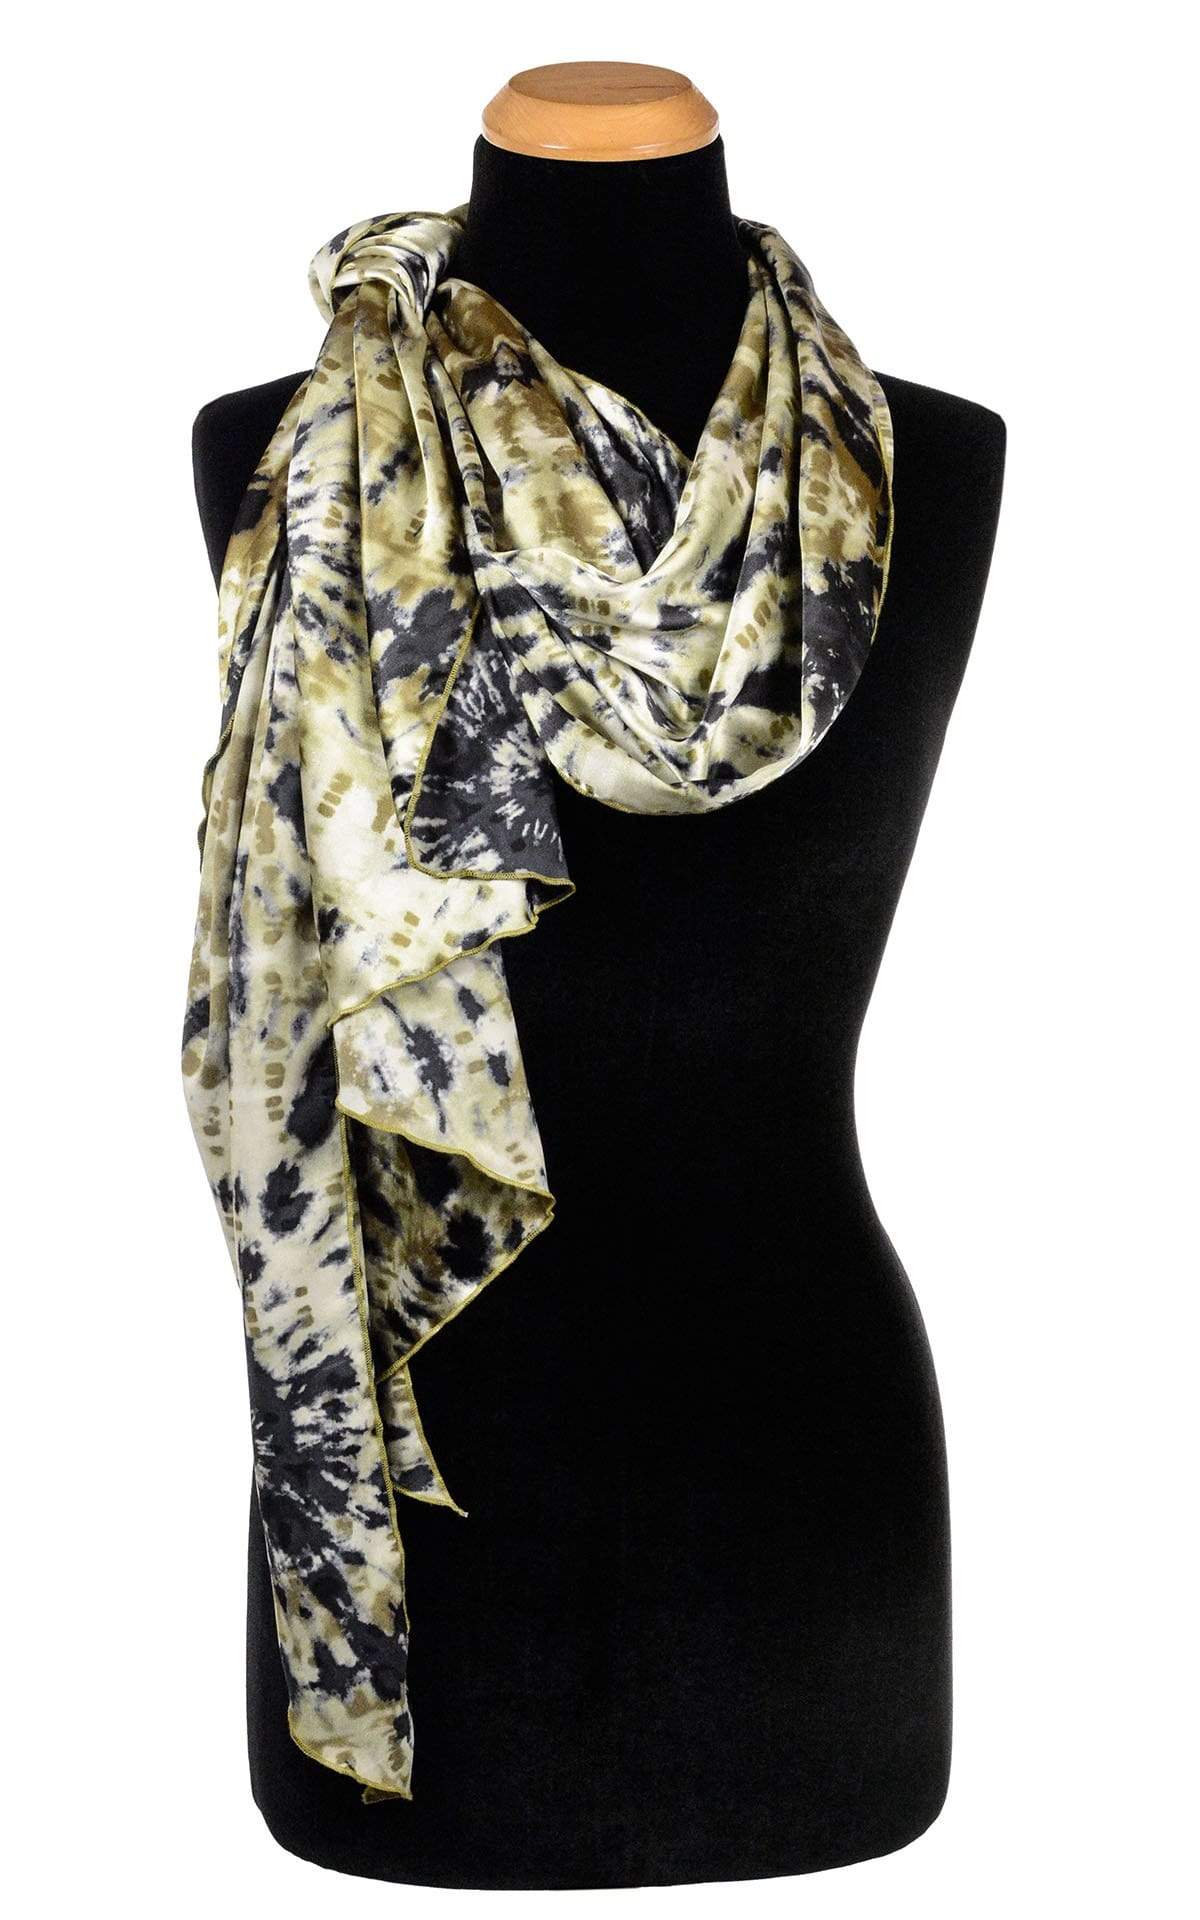 Women’s  Large Handkerchief Scarf, Wrap on Mannequin wrapped on side | | Egyptian Oasis, Black, Greens, and ivory tie-dye | Handmade in Seattle WA | Pandemonium Millinery